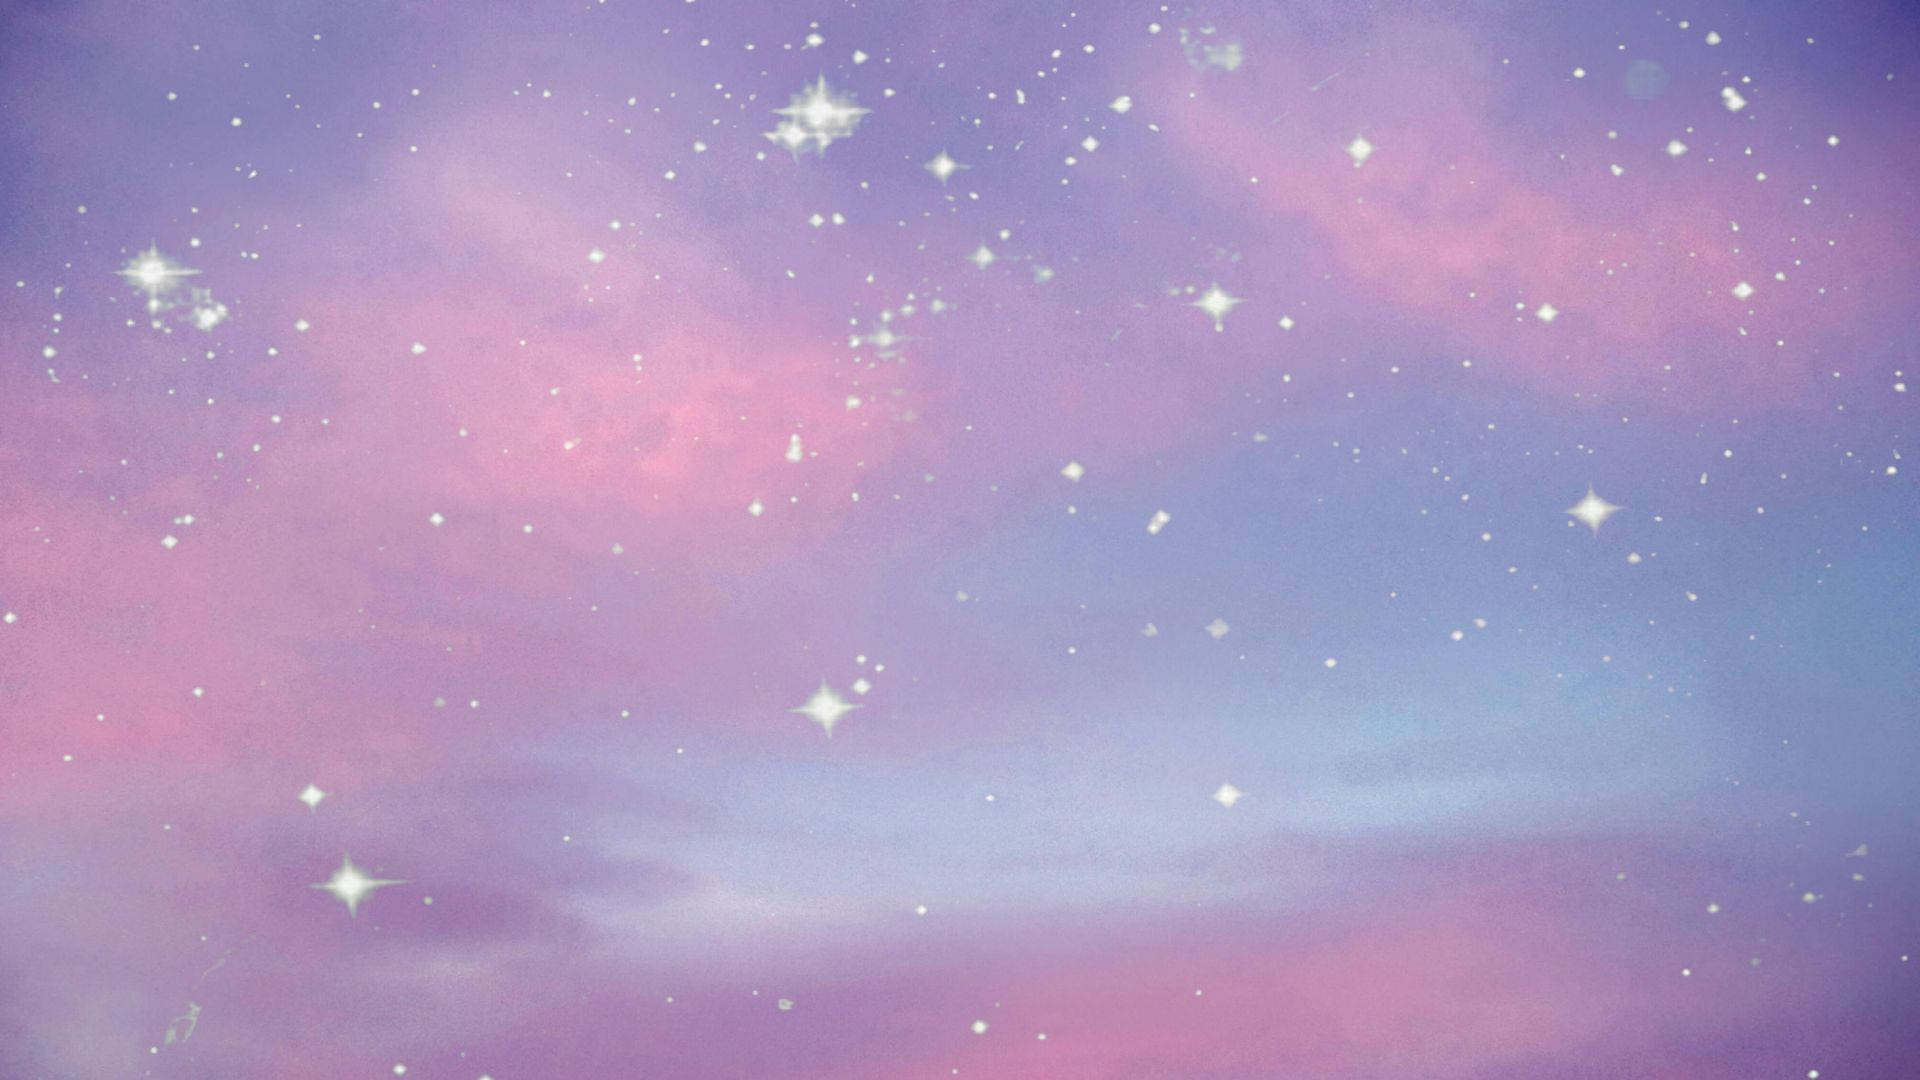 Stars Shining In A Cute Galaxy Picture